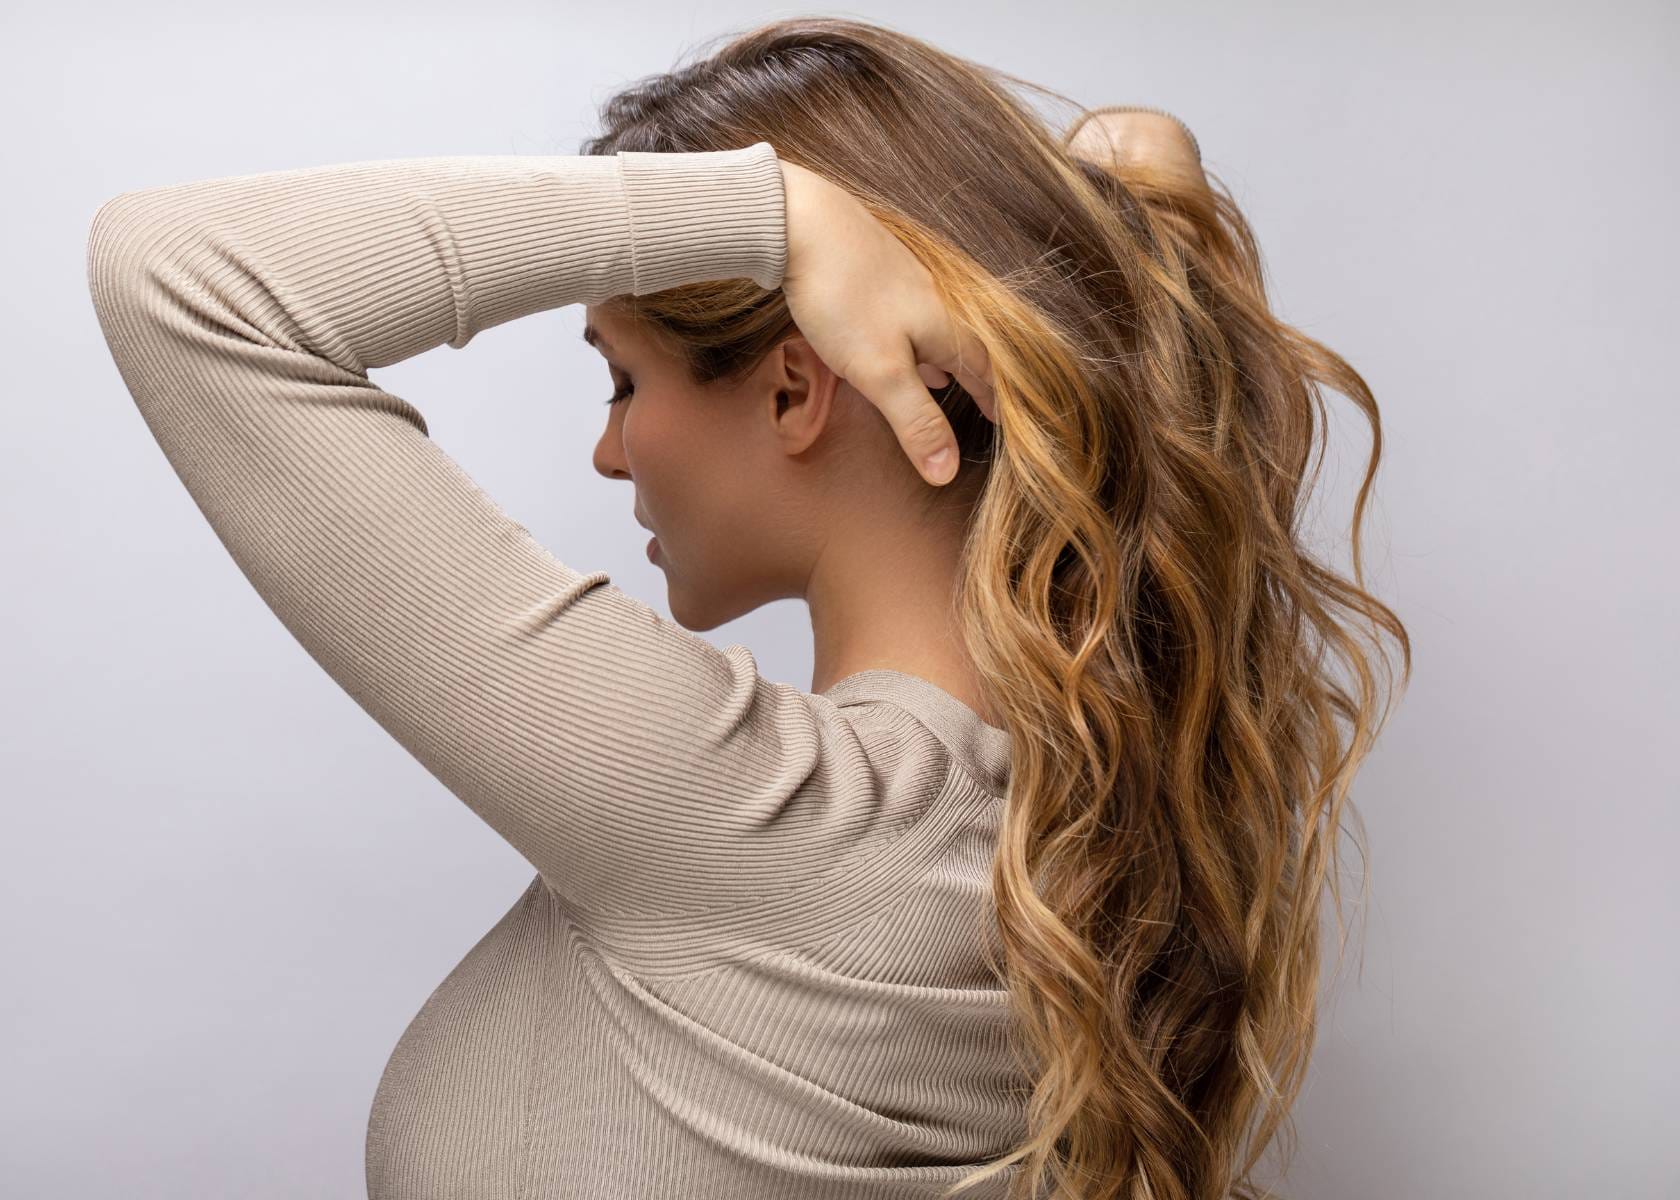 Tips for Managing Oily Hair and Dandruff